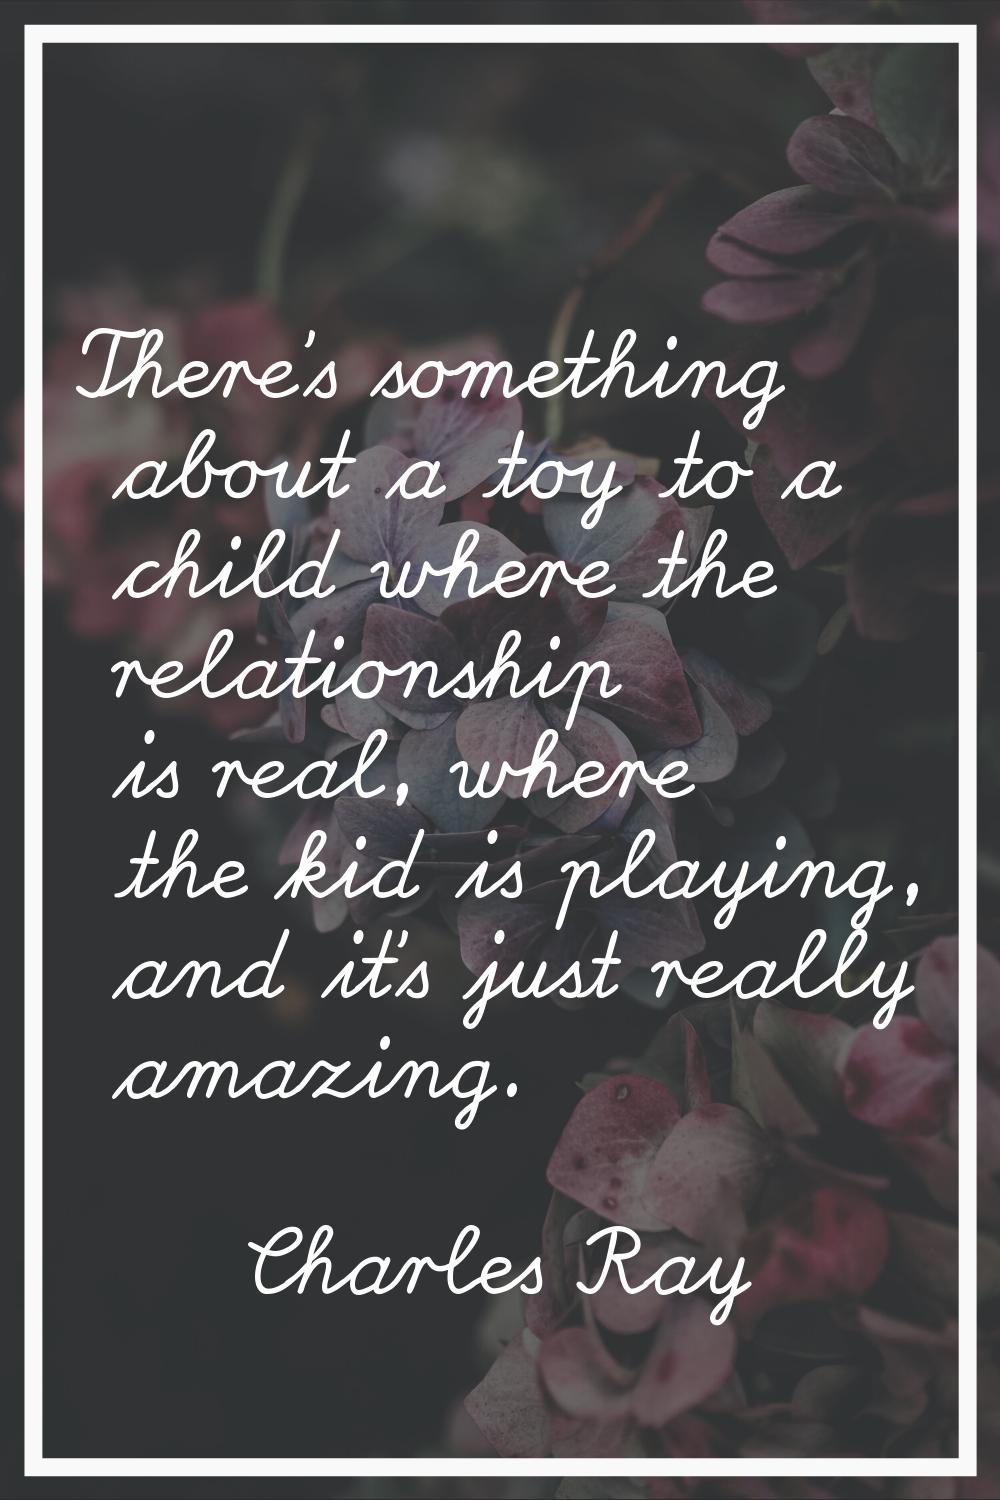 There's something about a toy to a child where the relationship is real, where the kid is playing, 